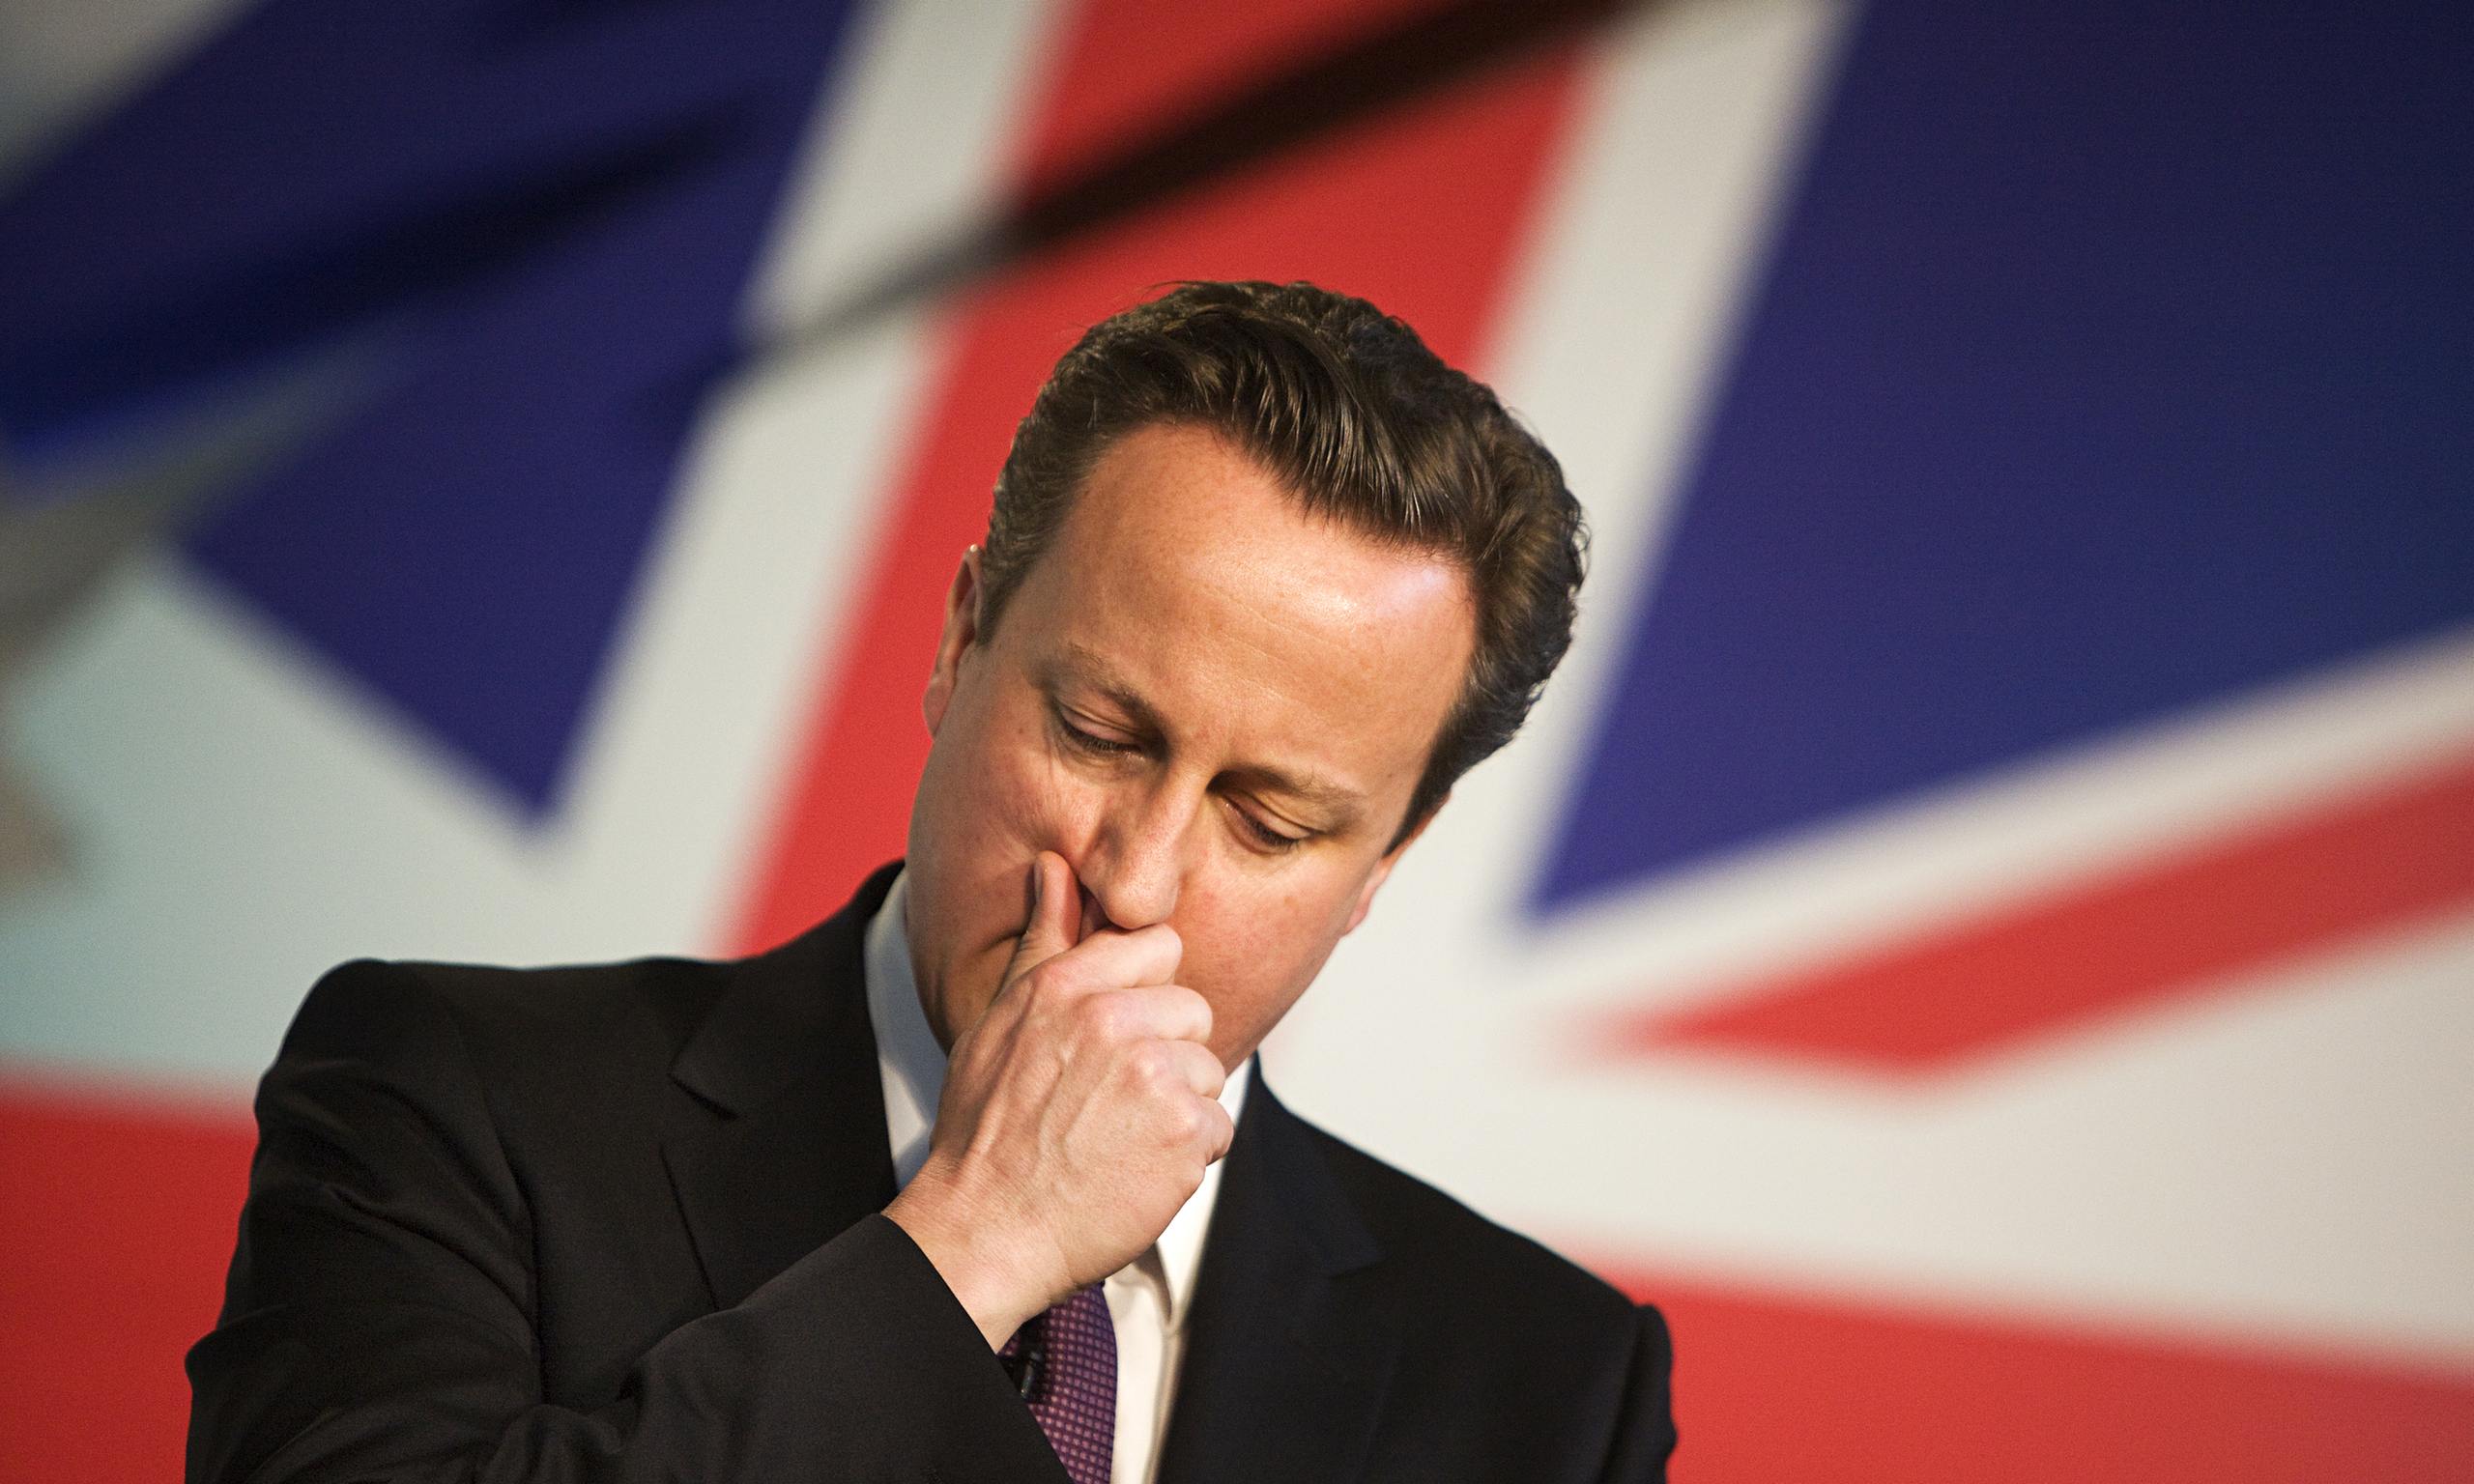 David Cameron in front of a union jack